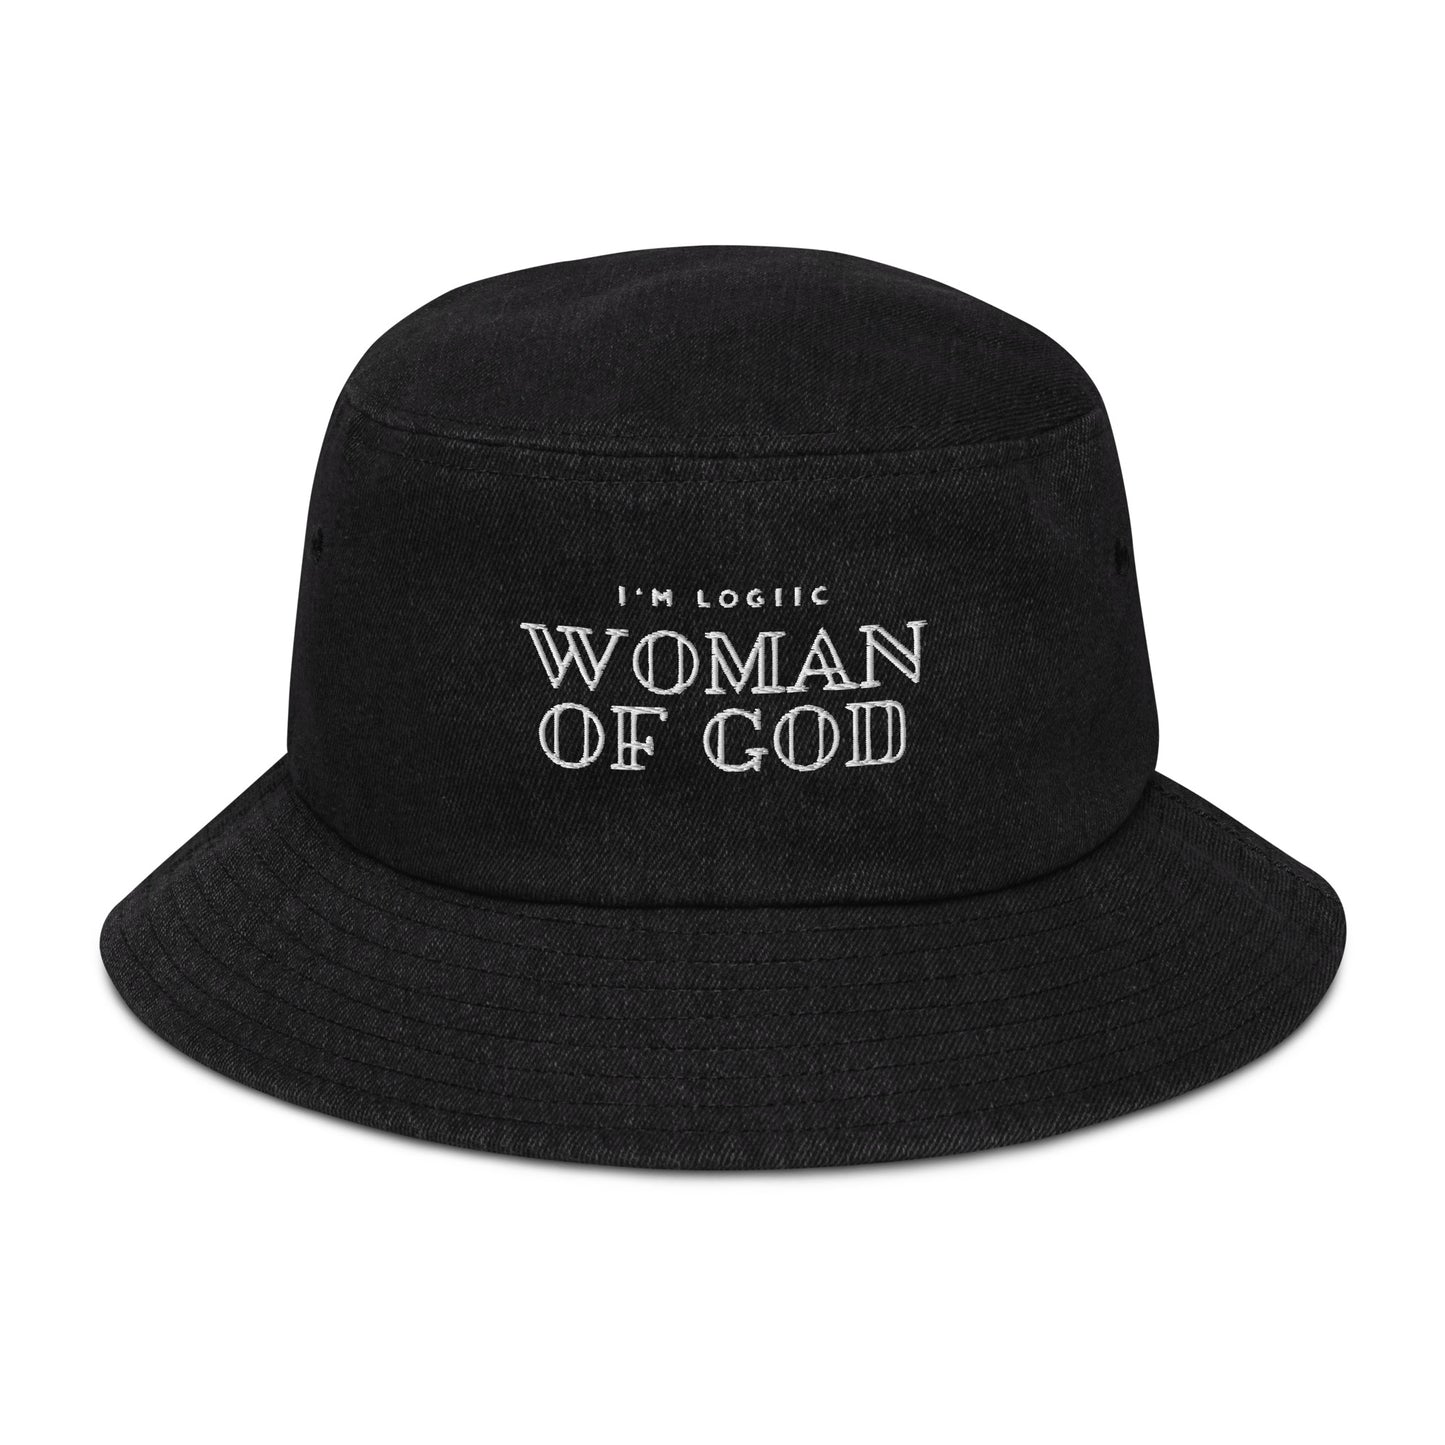 Woman of God Embroidered Denim bucket hat - Hats